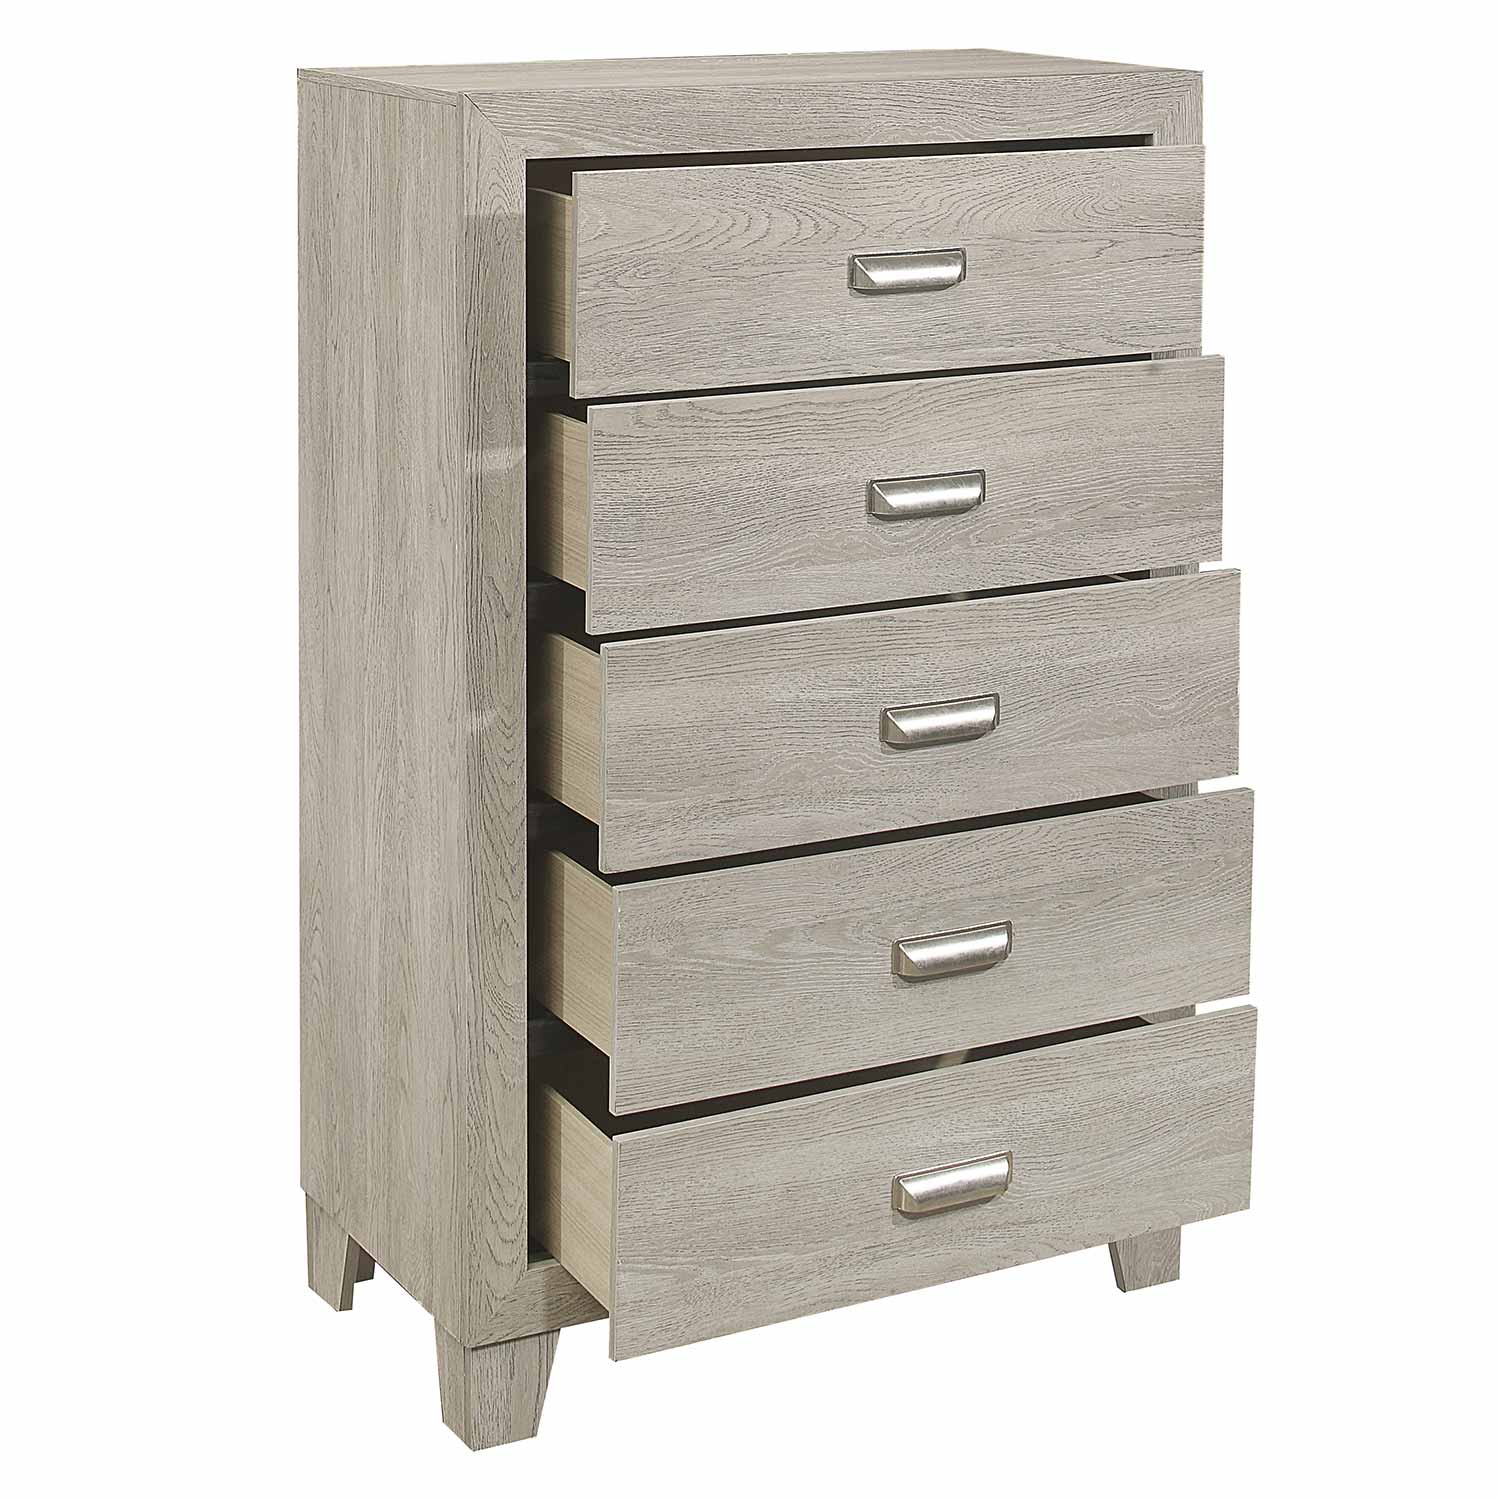 Homelegance Quinby Chest - Light Gray